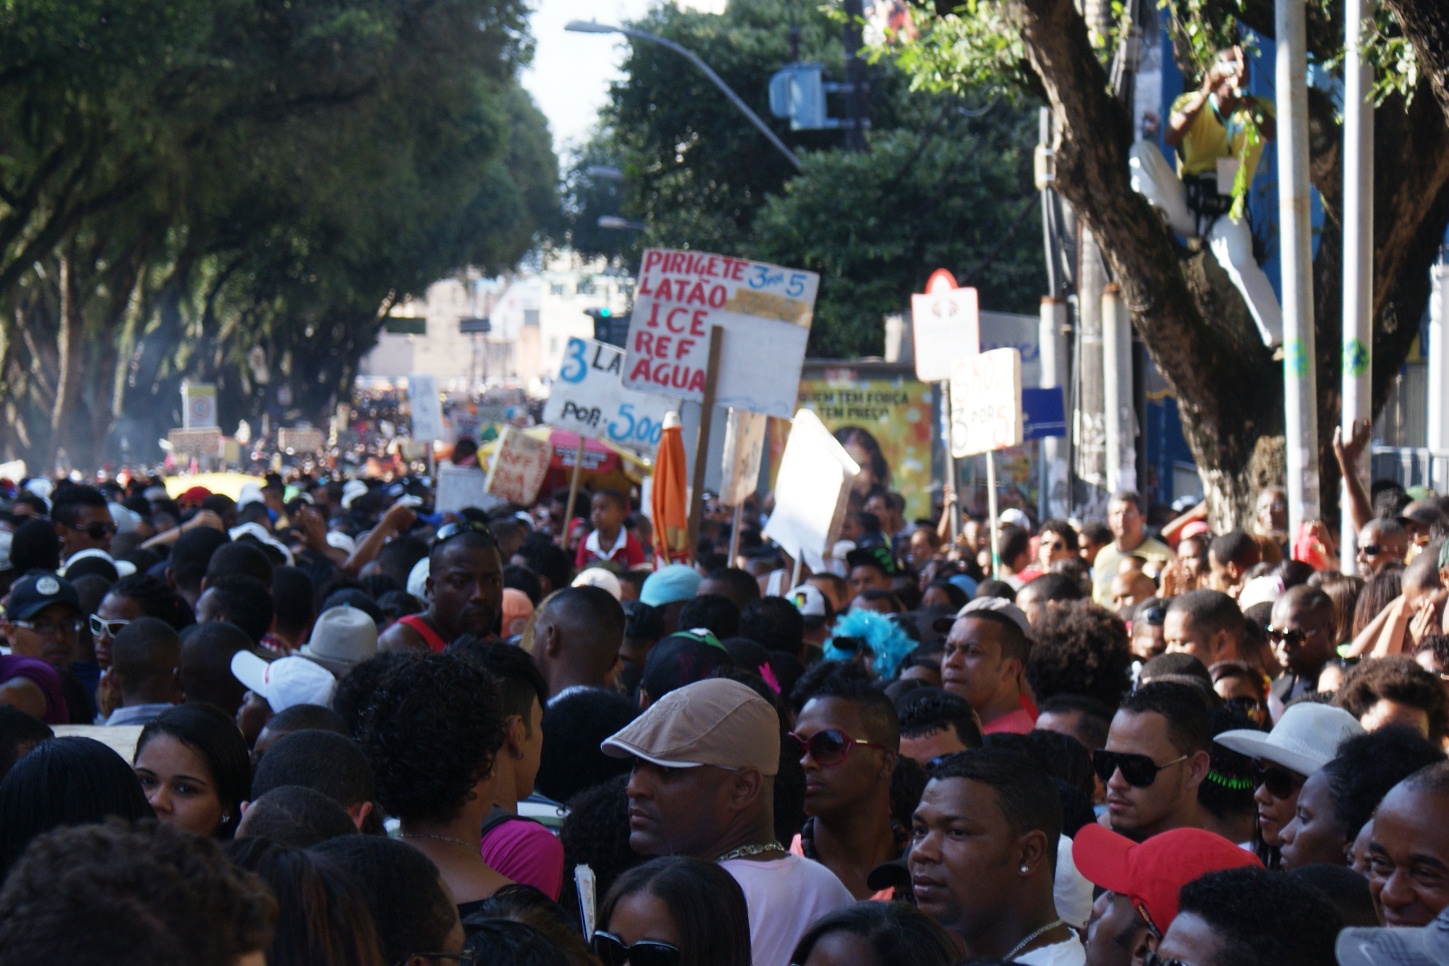 Thousands joined in Bahia's Pride Parade, photo by Ben Tavener.